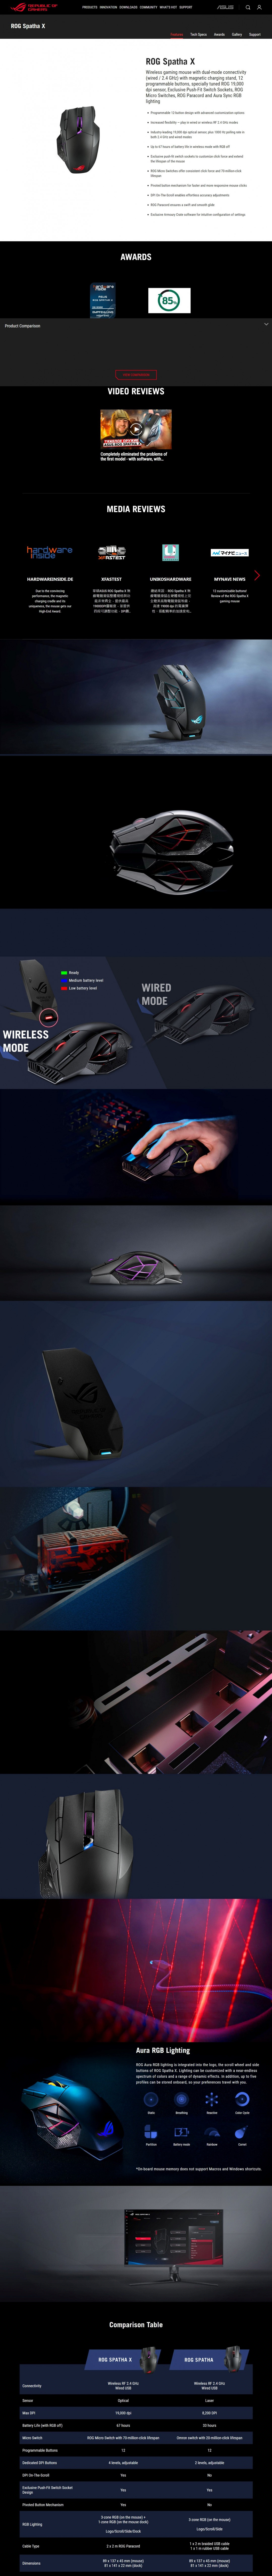  ASUS ROG SPATHA X Wireless Gaming Mouse